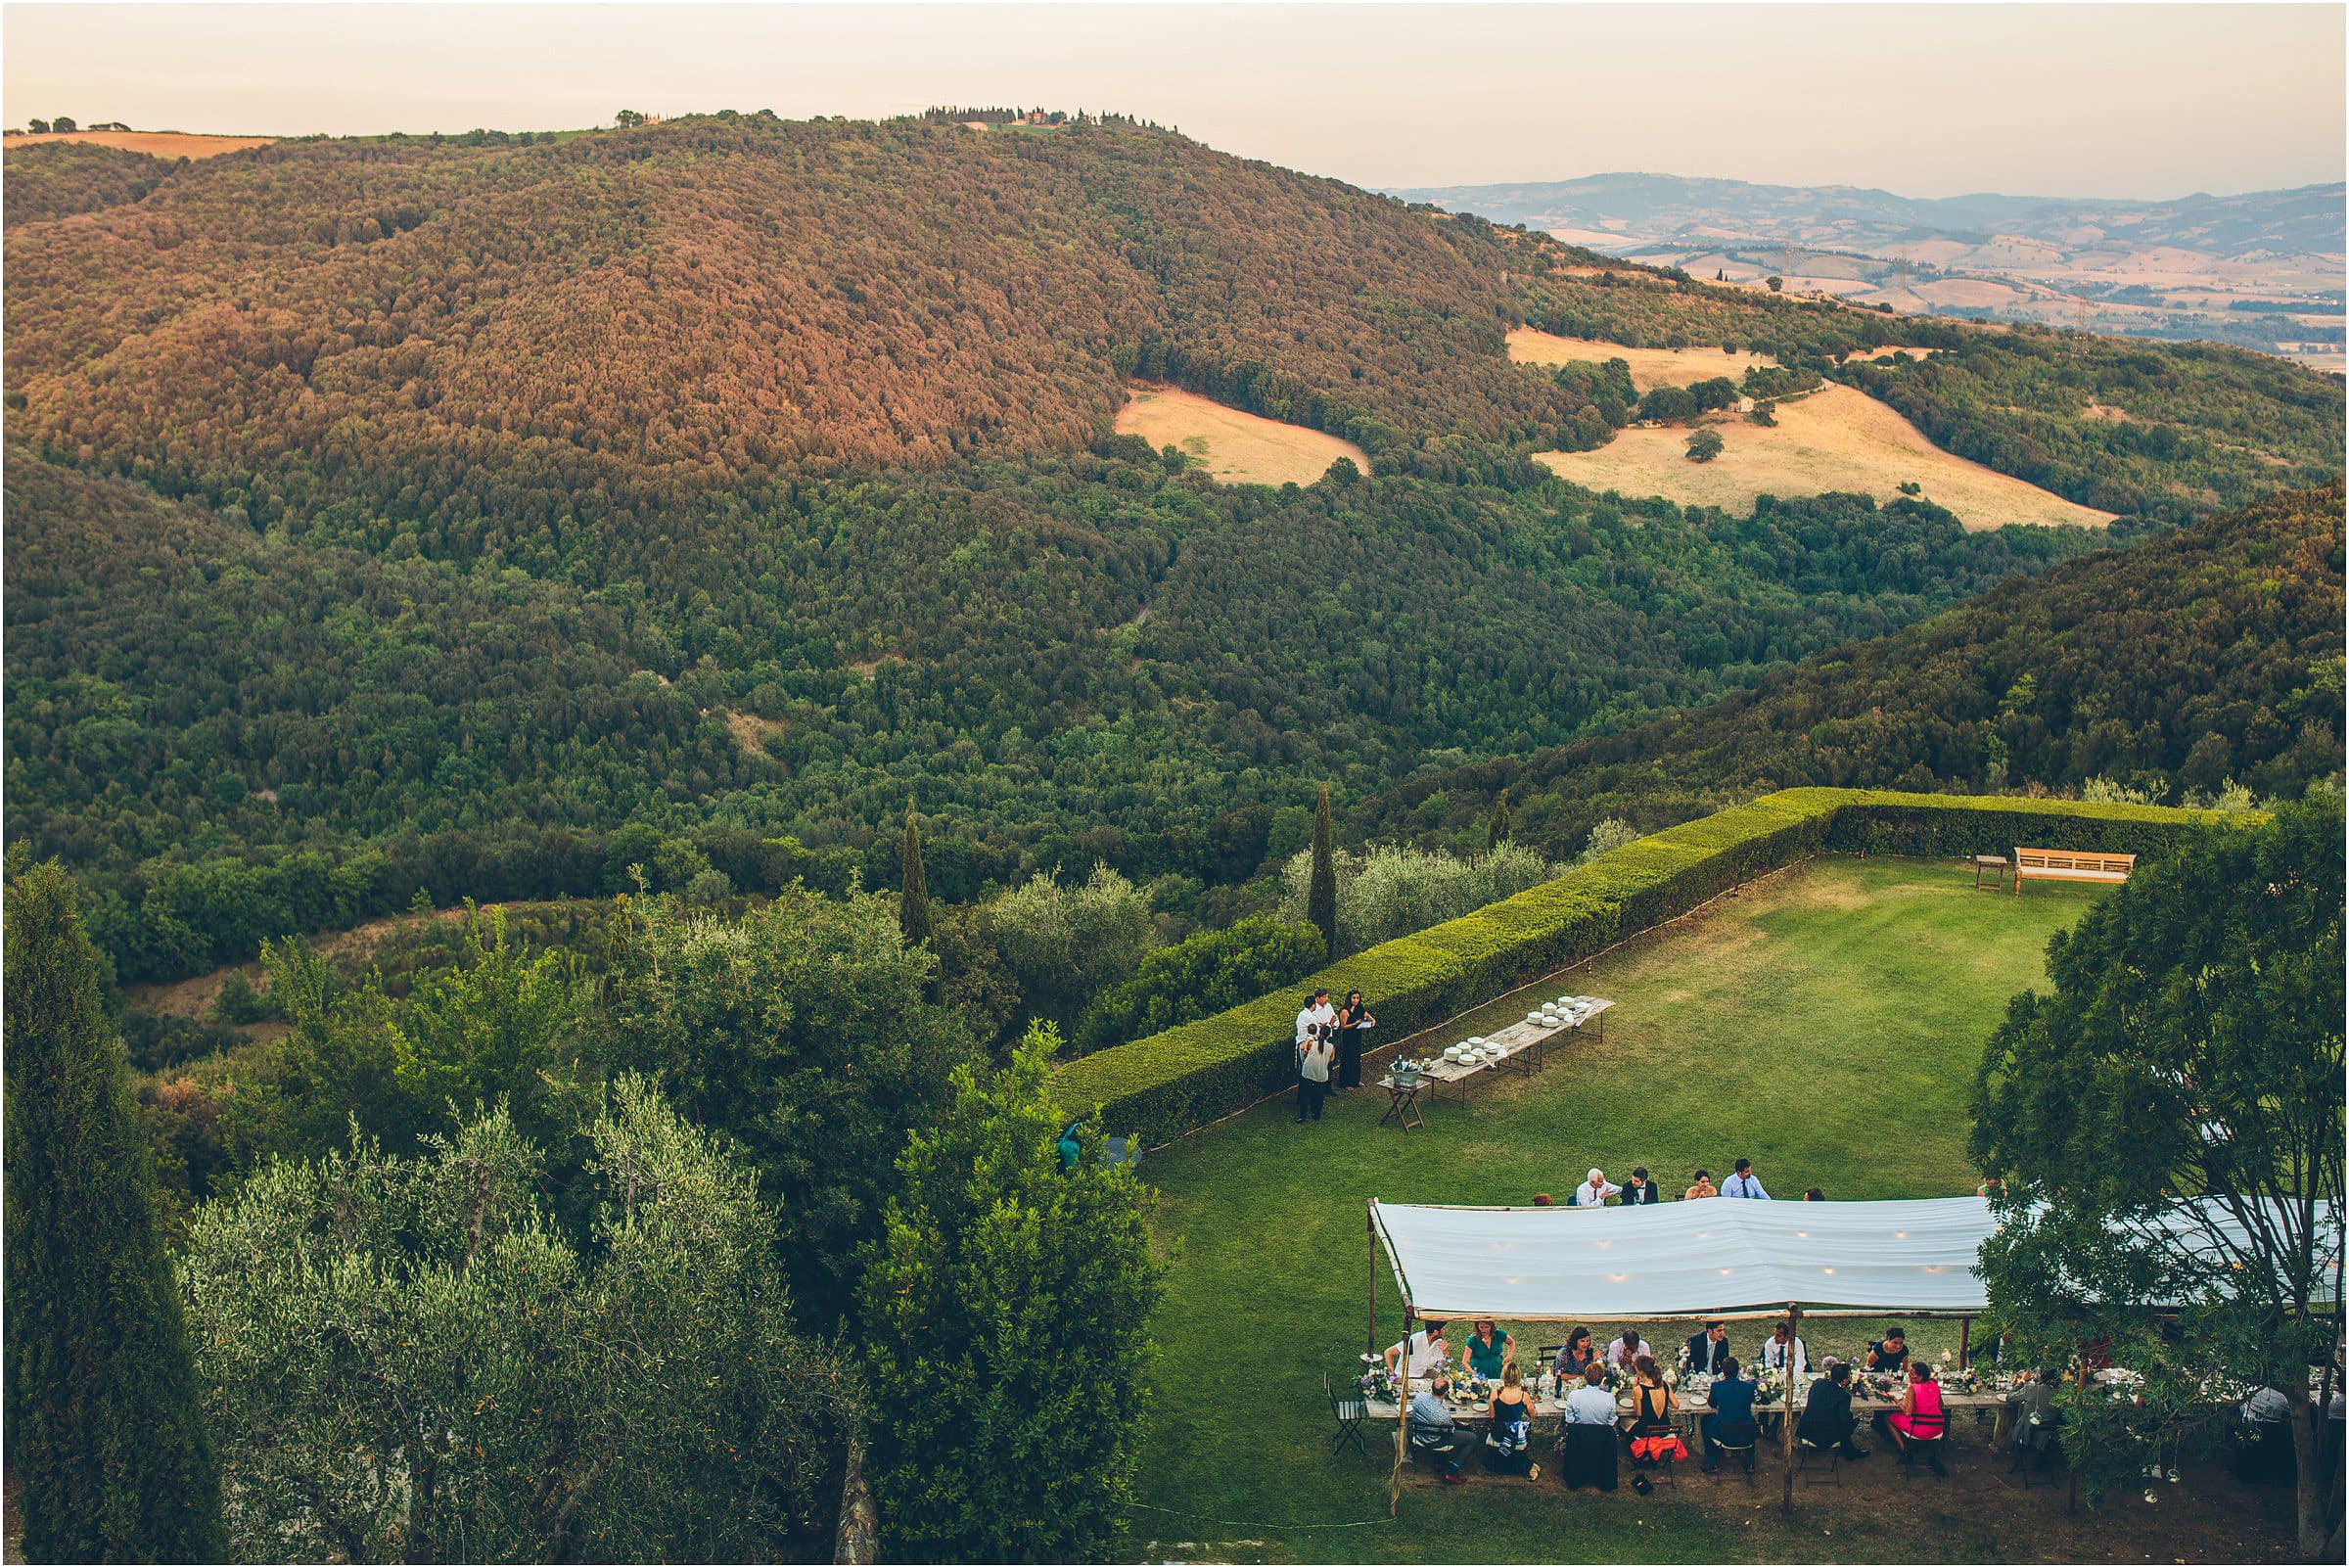 The hills around Castello di Vicarello in Tuscany in the evening sun as guests enjoy dinner outdoors